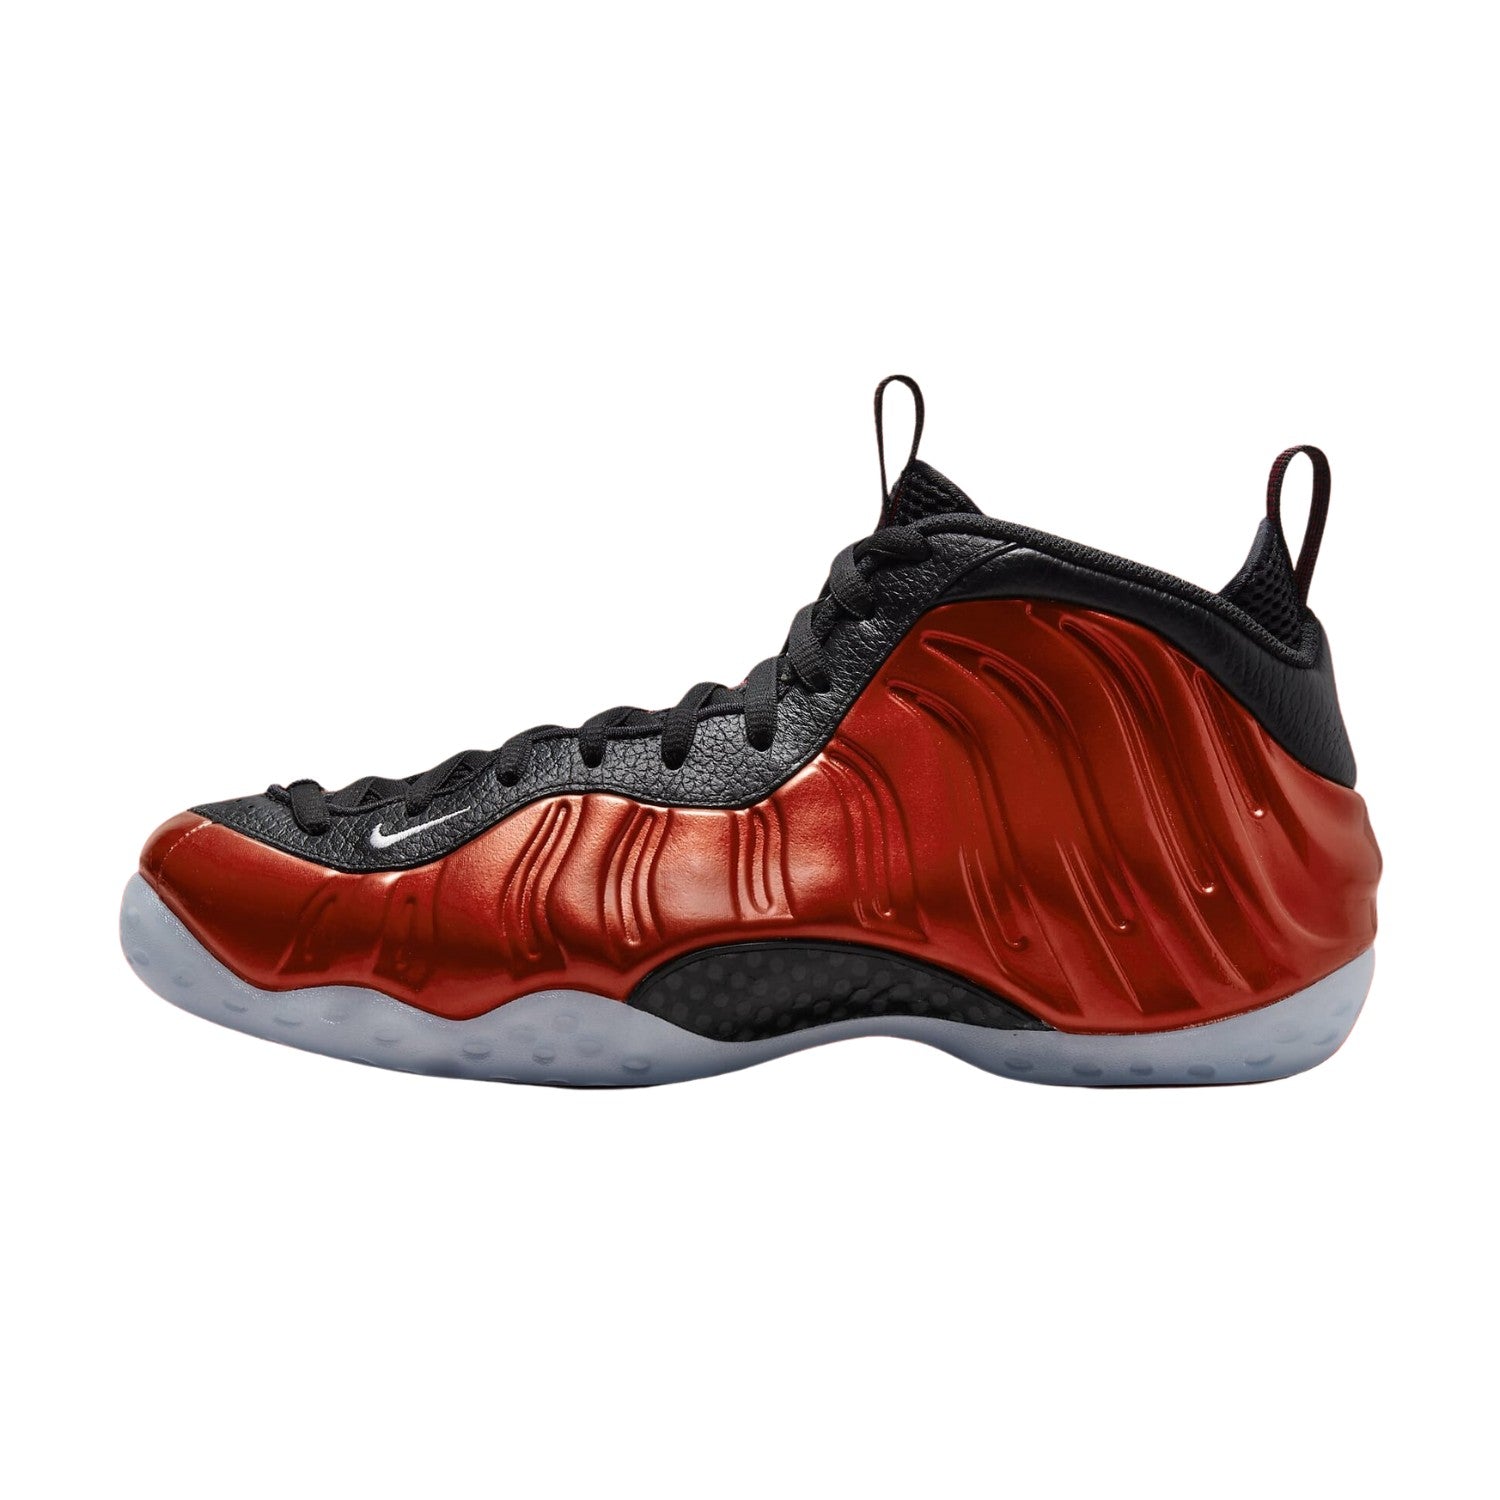 Nike Air Foamposite One Mens Style : Dz2545-600